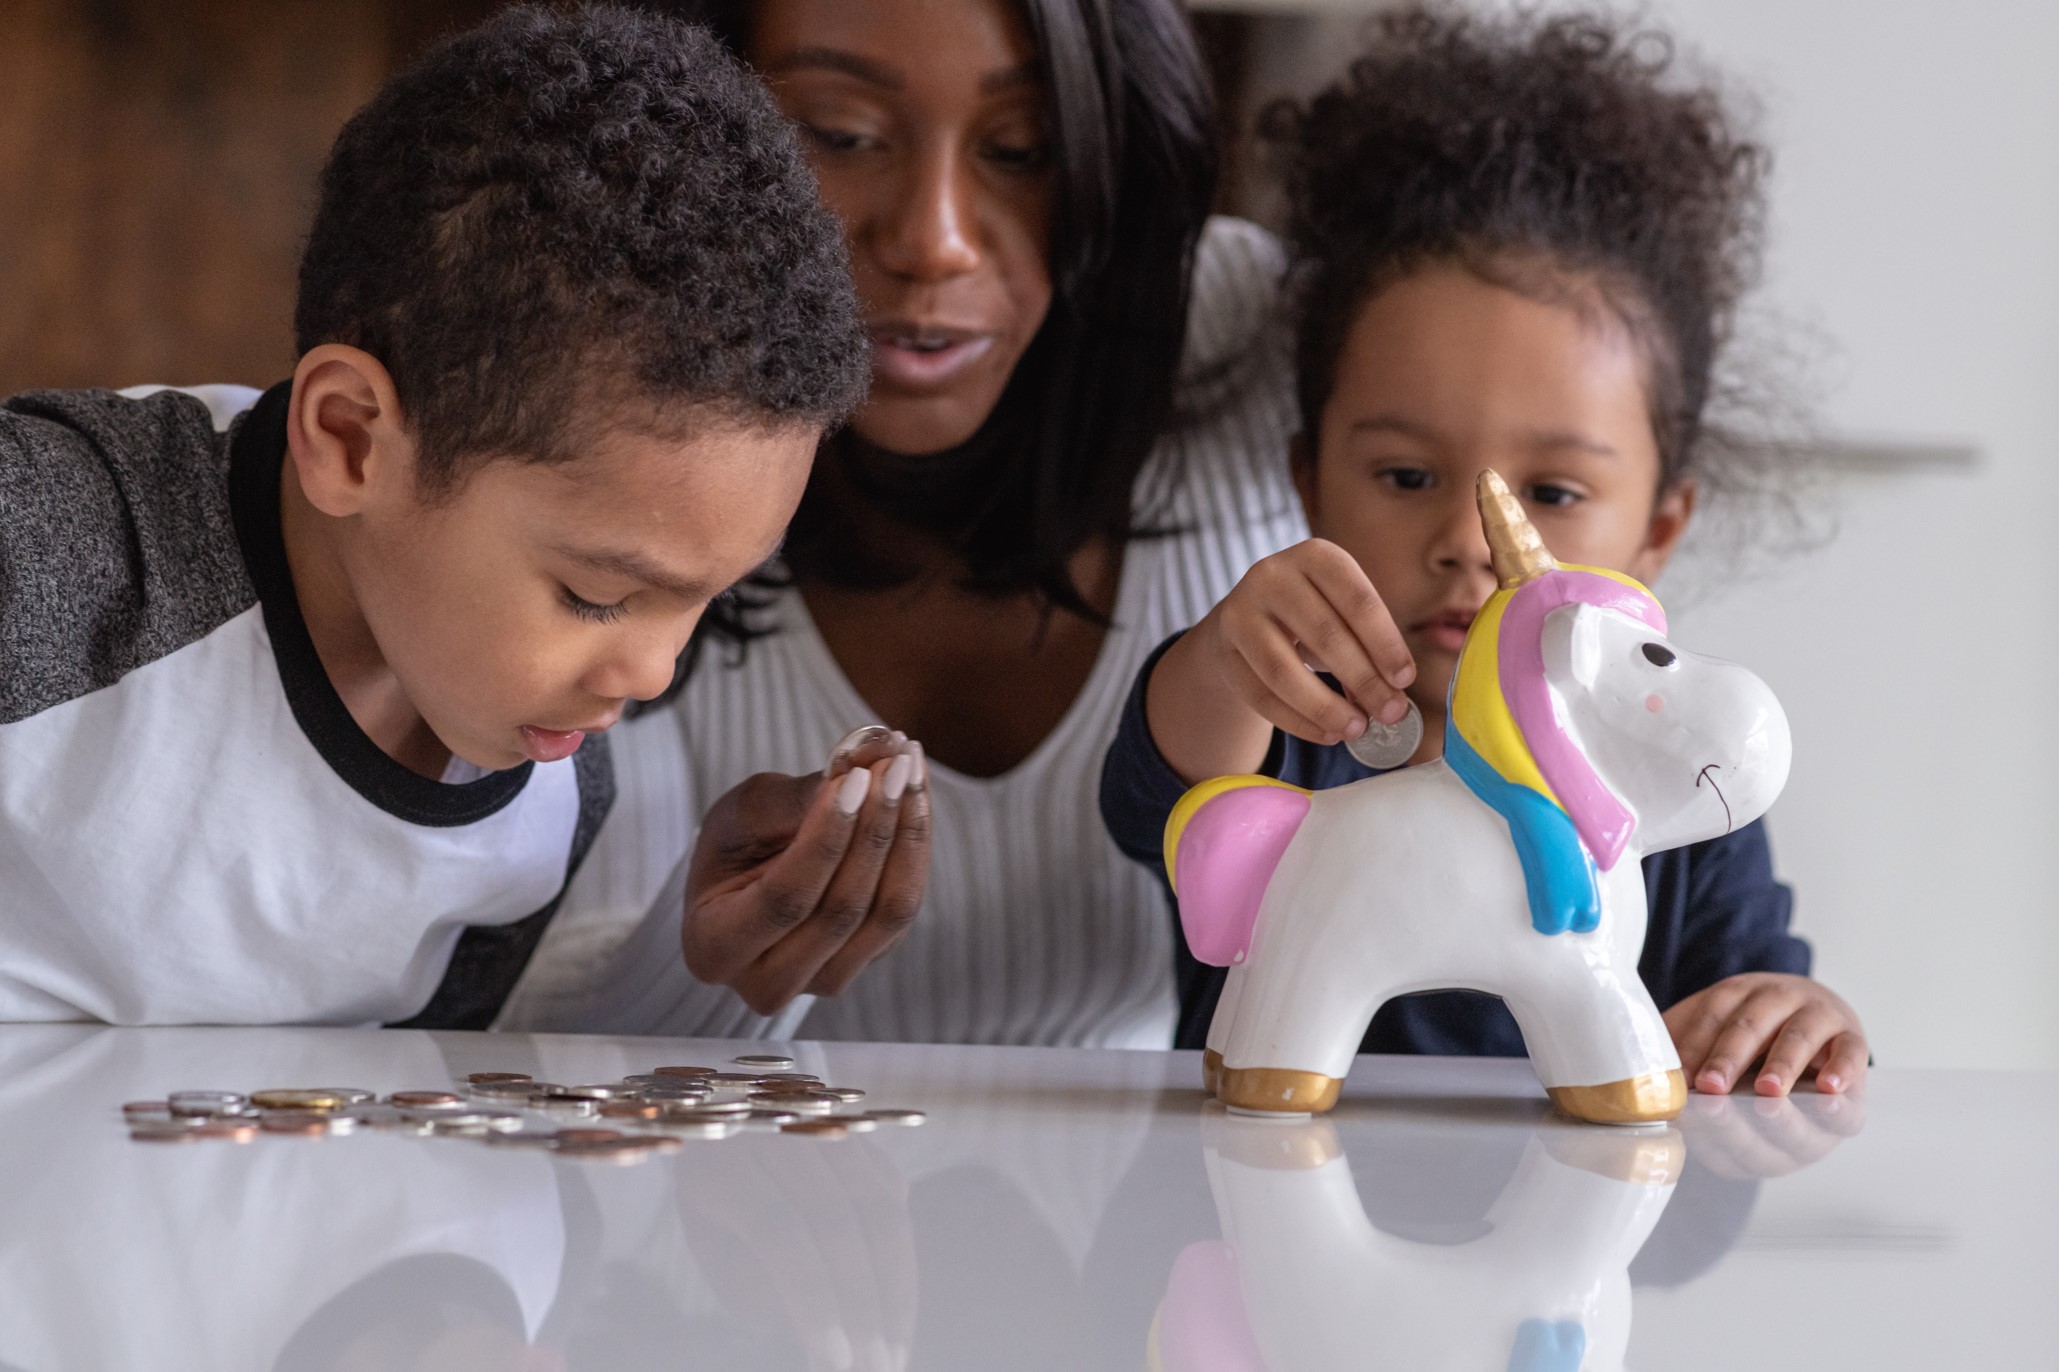 Woman overlooking two small kids at a table. The kids are looking at coins on the table and putting them into a unicorn piggy bank.